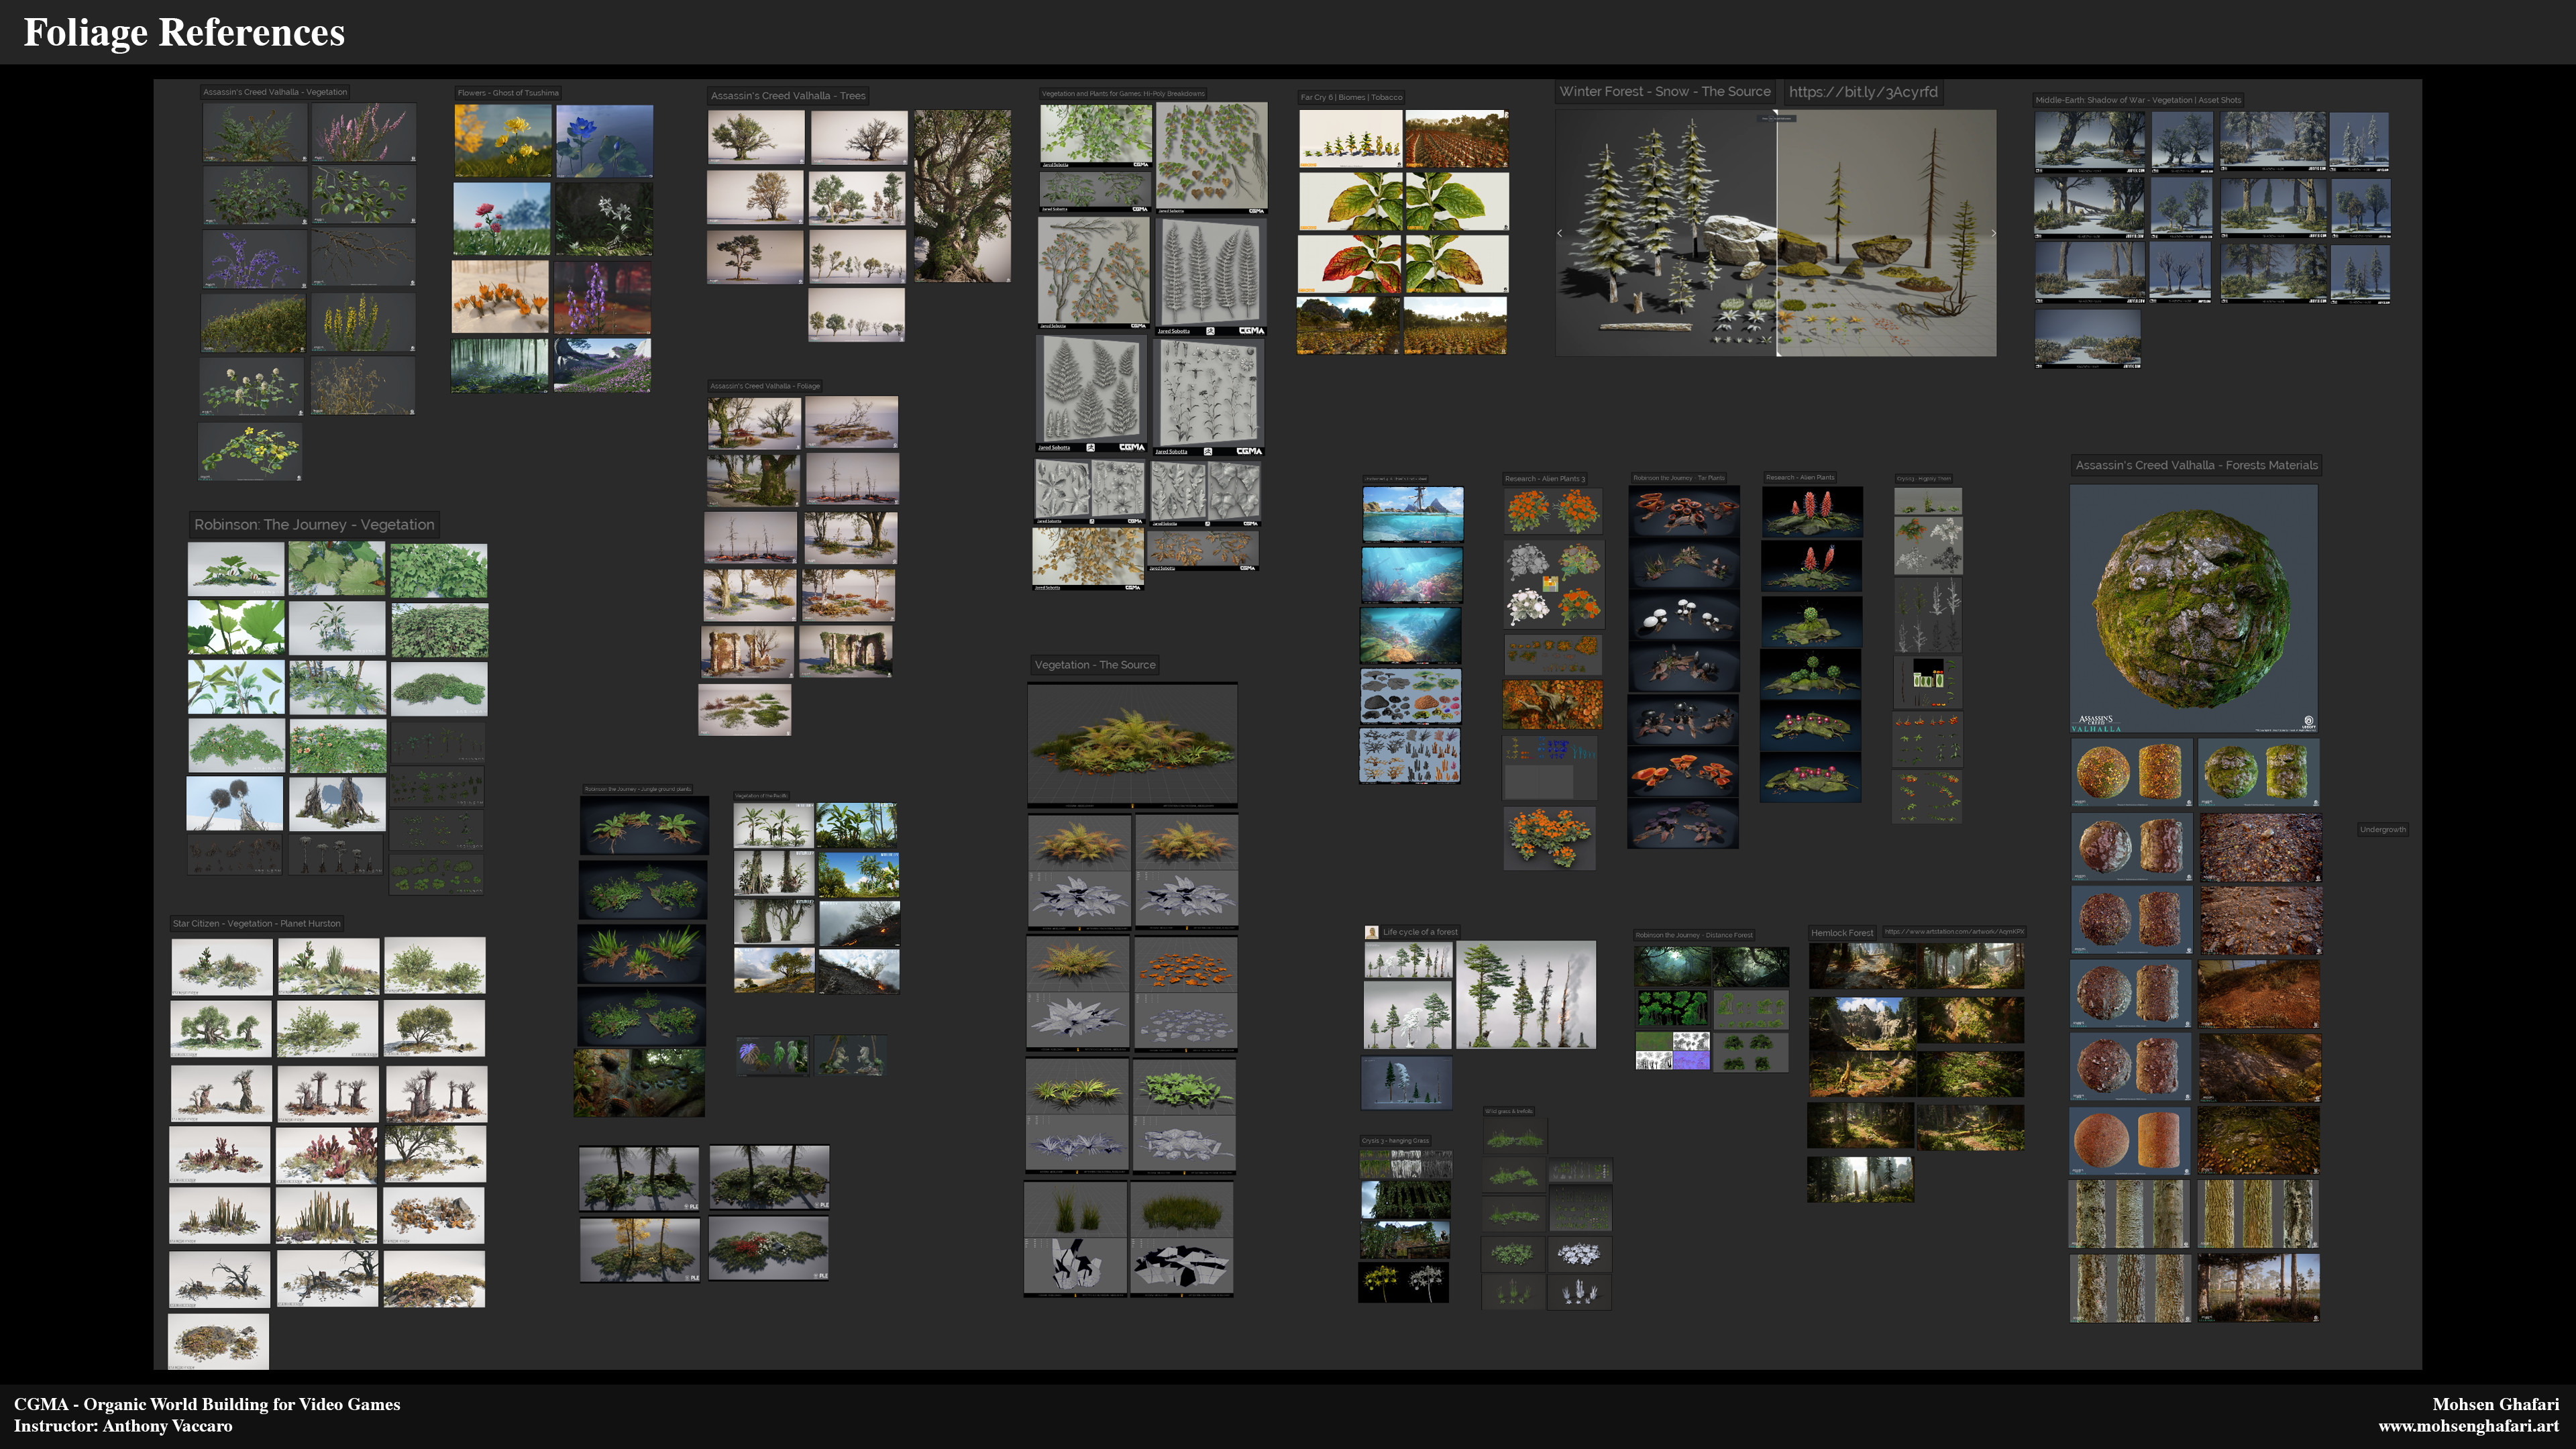 At the beginning of the workshop, I started to gather as much as reference as I can and put them together in a categories so I can look at them. in this reference board, I collected foliage that I might use in my scene.